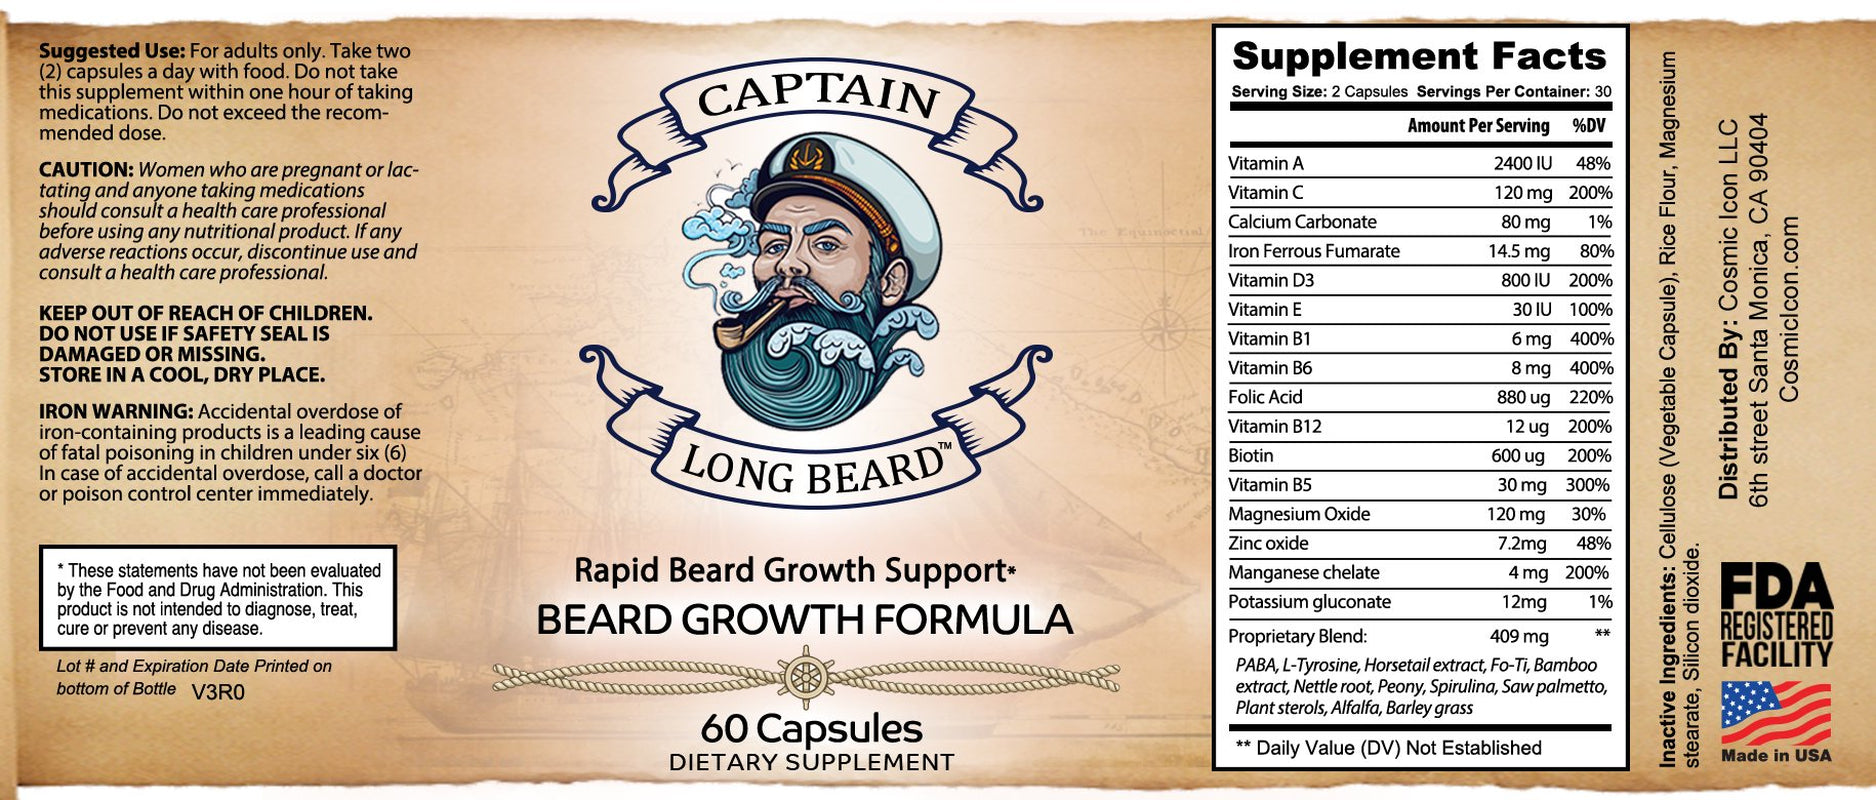 Beard Growth Supplementary Products and Hair Growth Pills with Biotin - 60 Capsules